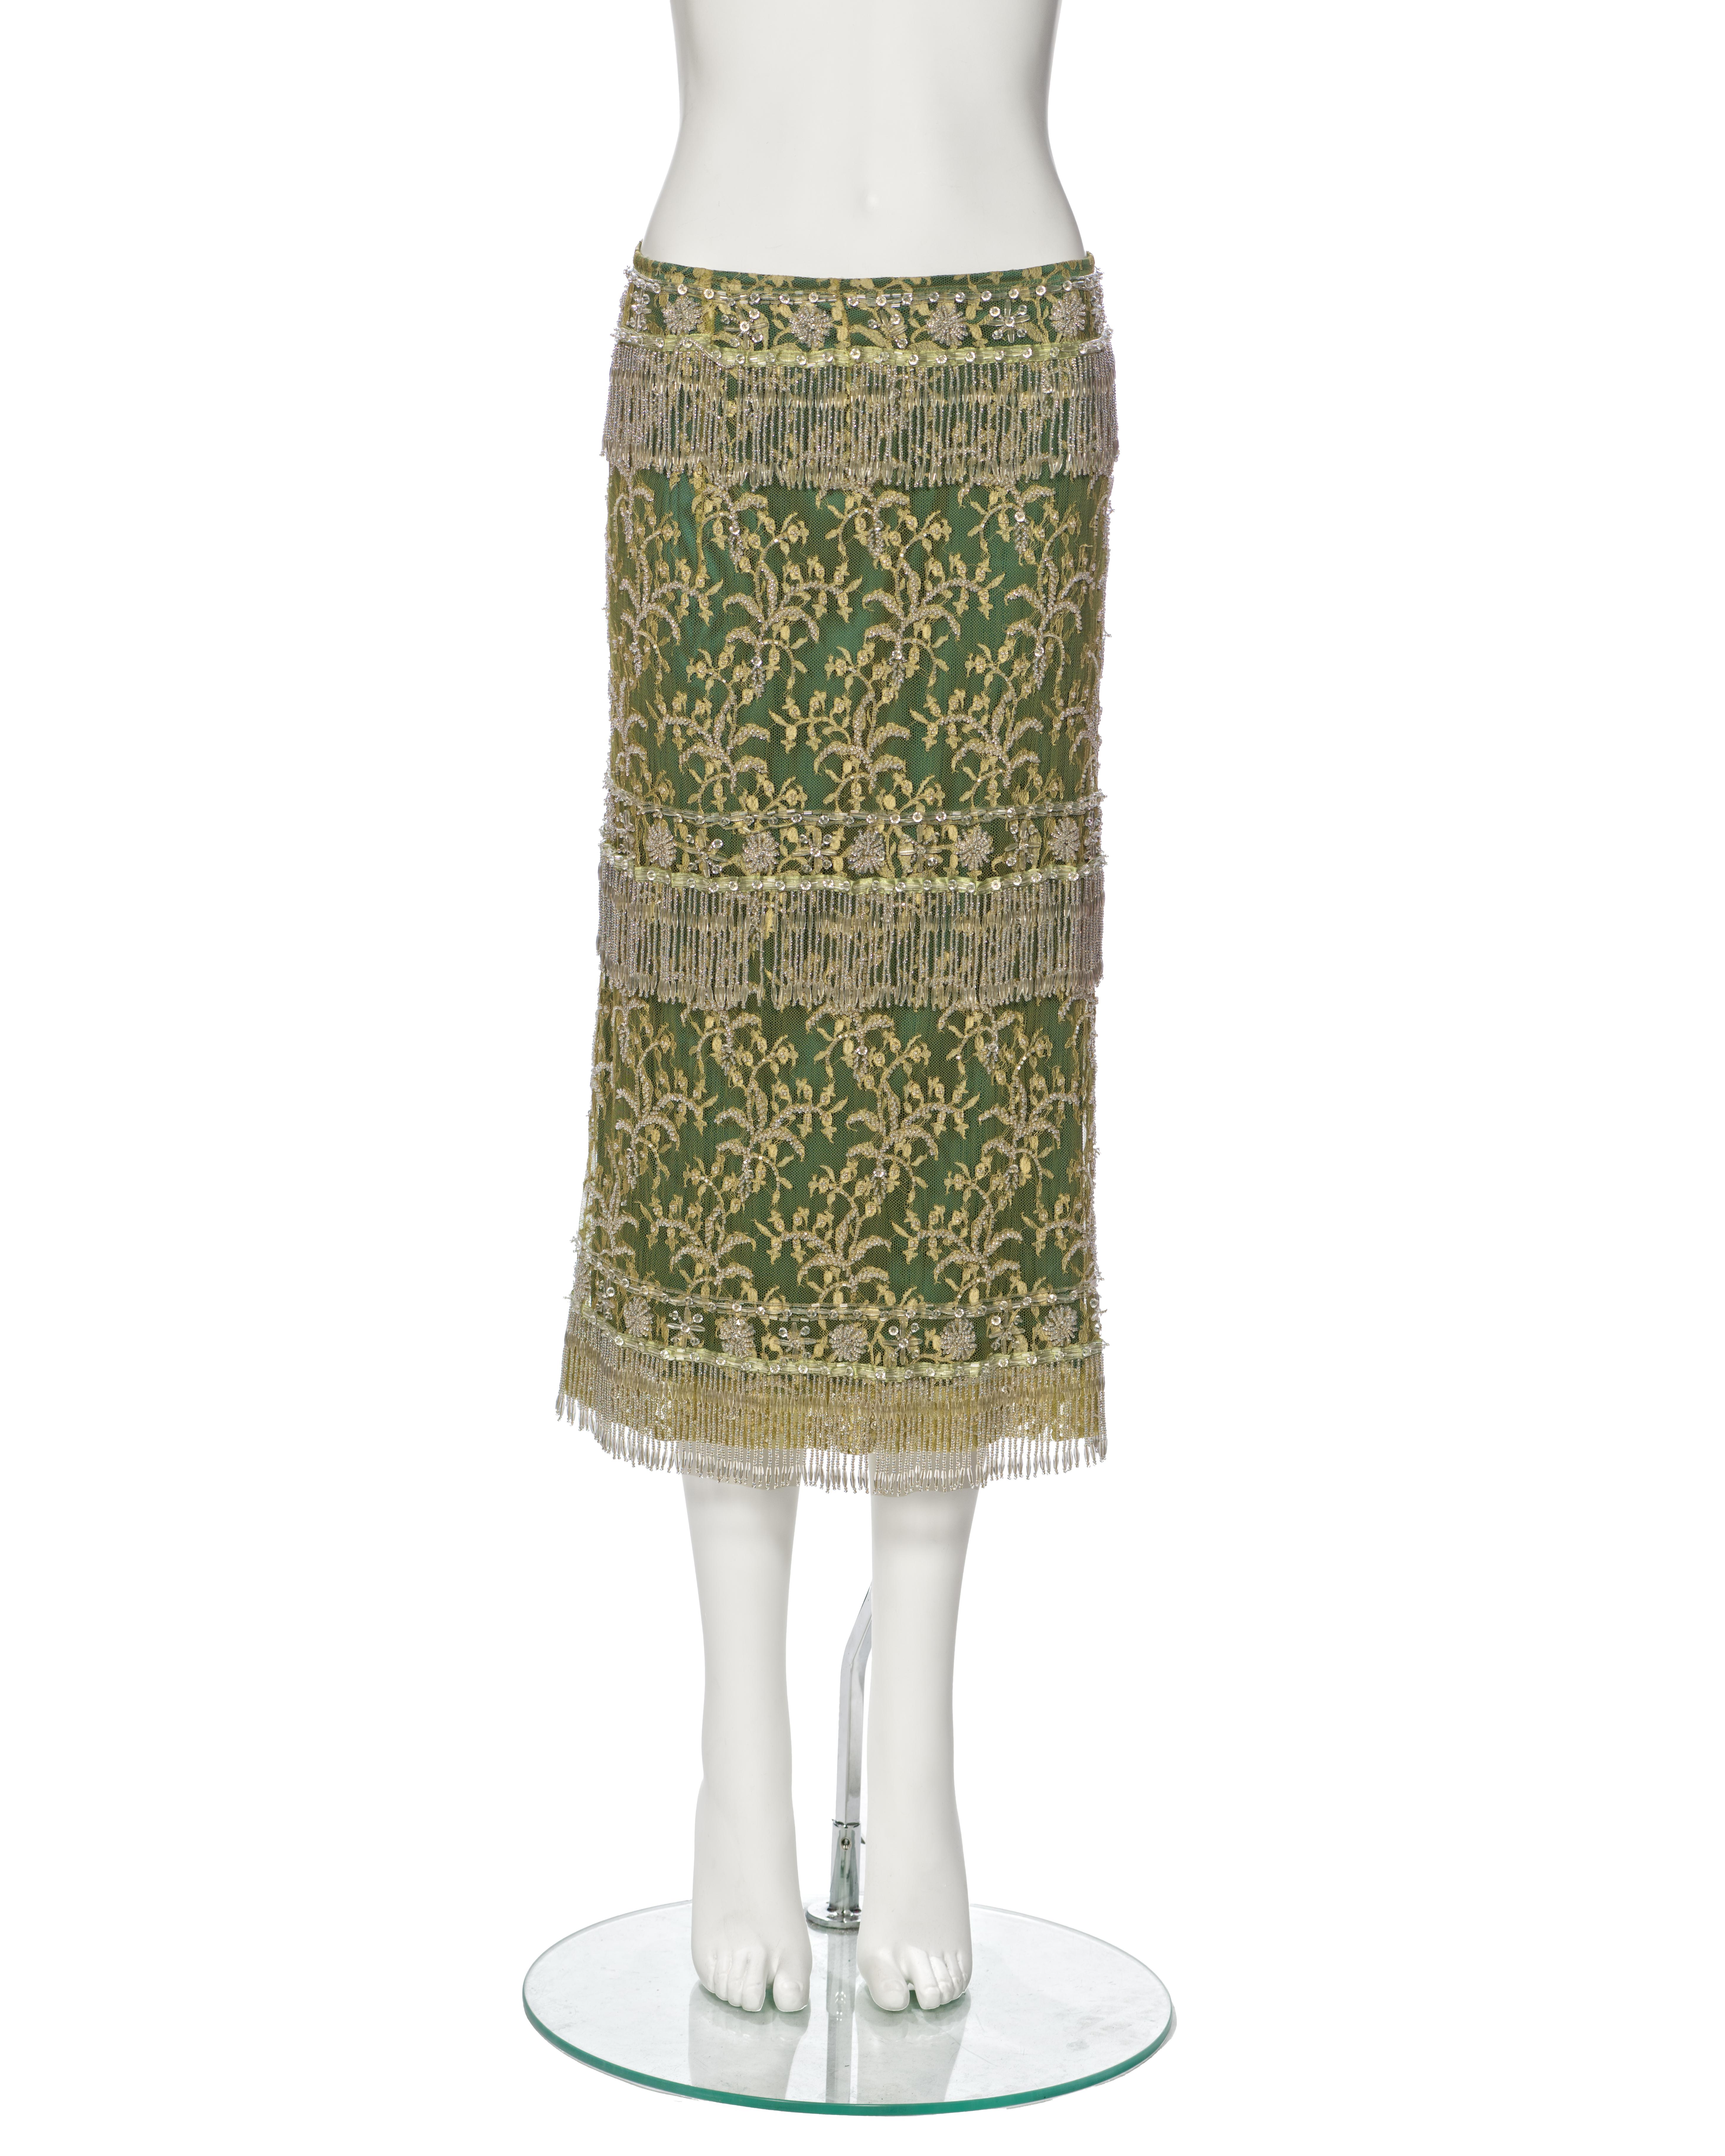 ▪ Rare Dolce & Gabbana Beaded Lace Evening Skirt
▪ Spring-Summer 2000
▪ Sold by One of a Kind Archive
▪ Expertly crafted from chartreuse lace, meticulously embellished with clear beads
▪ Adorned with tiered clear beaded tassel trim
▪ Lined with